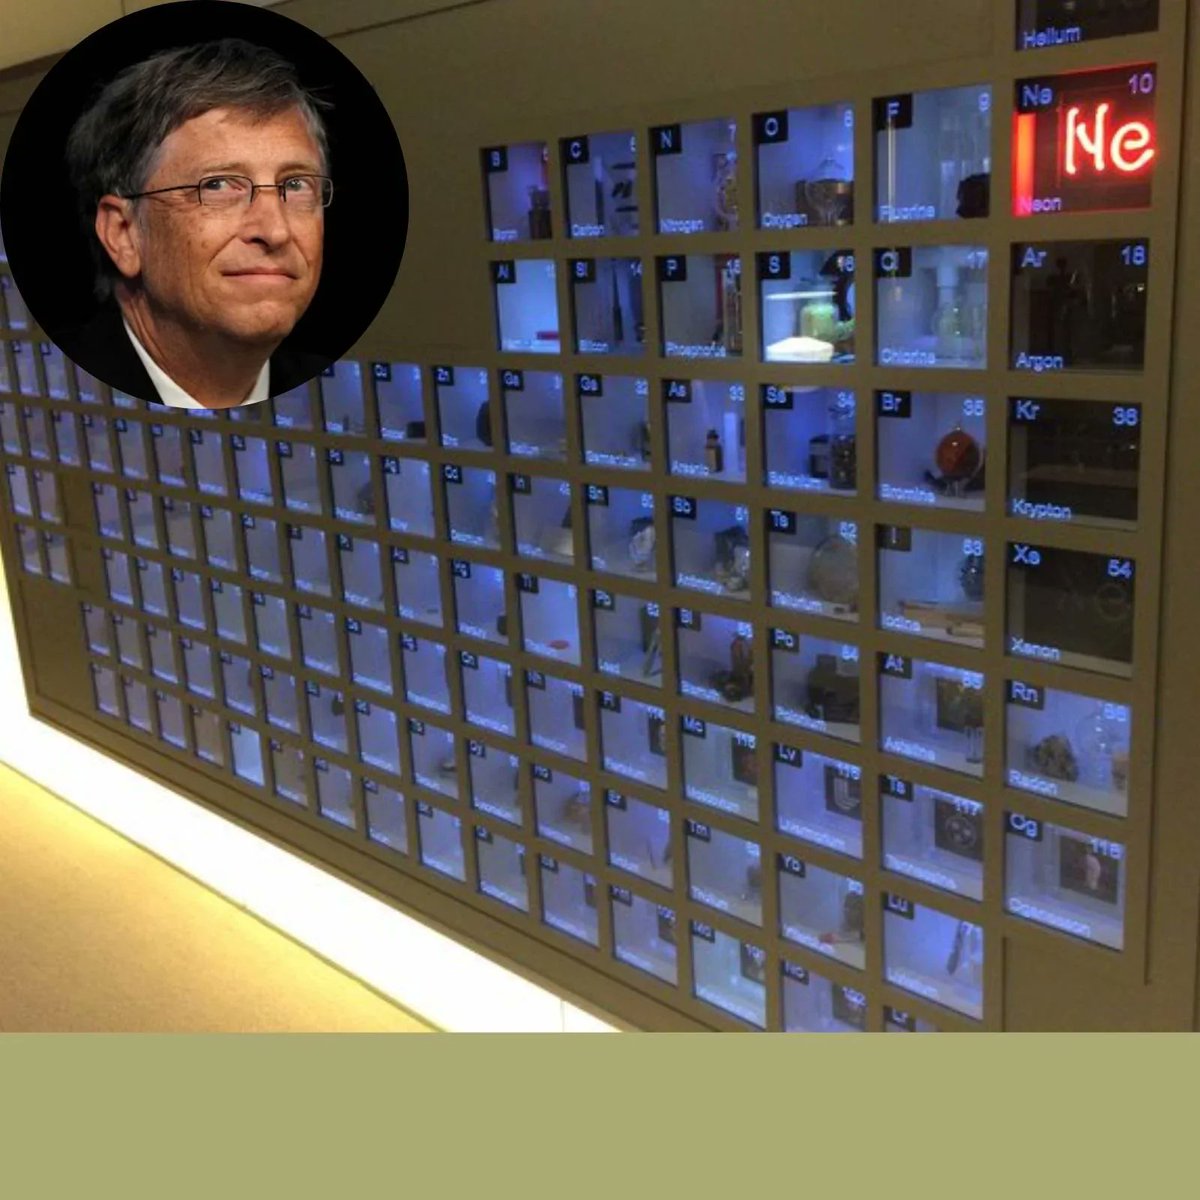 9. Bill Gates Office Has a Periodic Table With Samples of Each Chemical